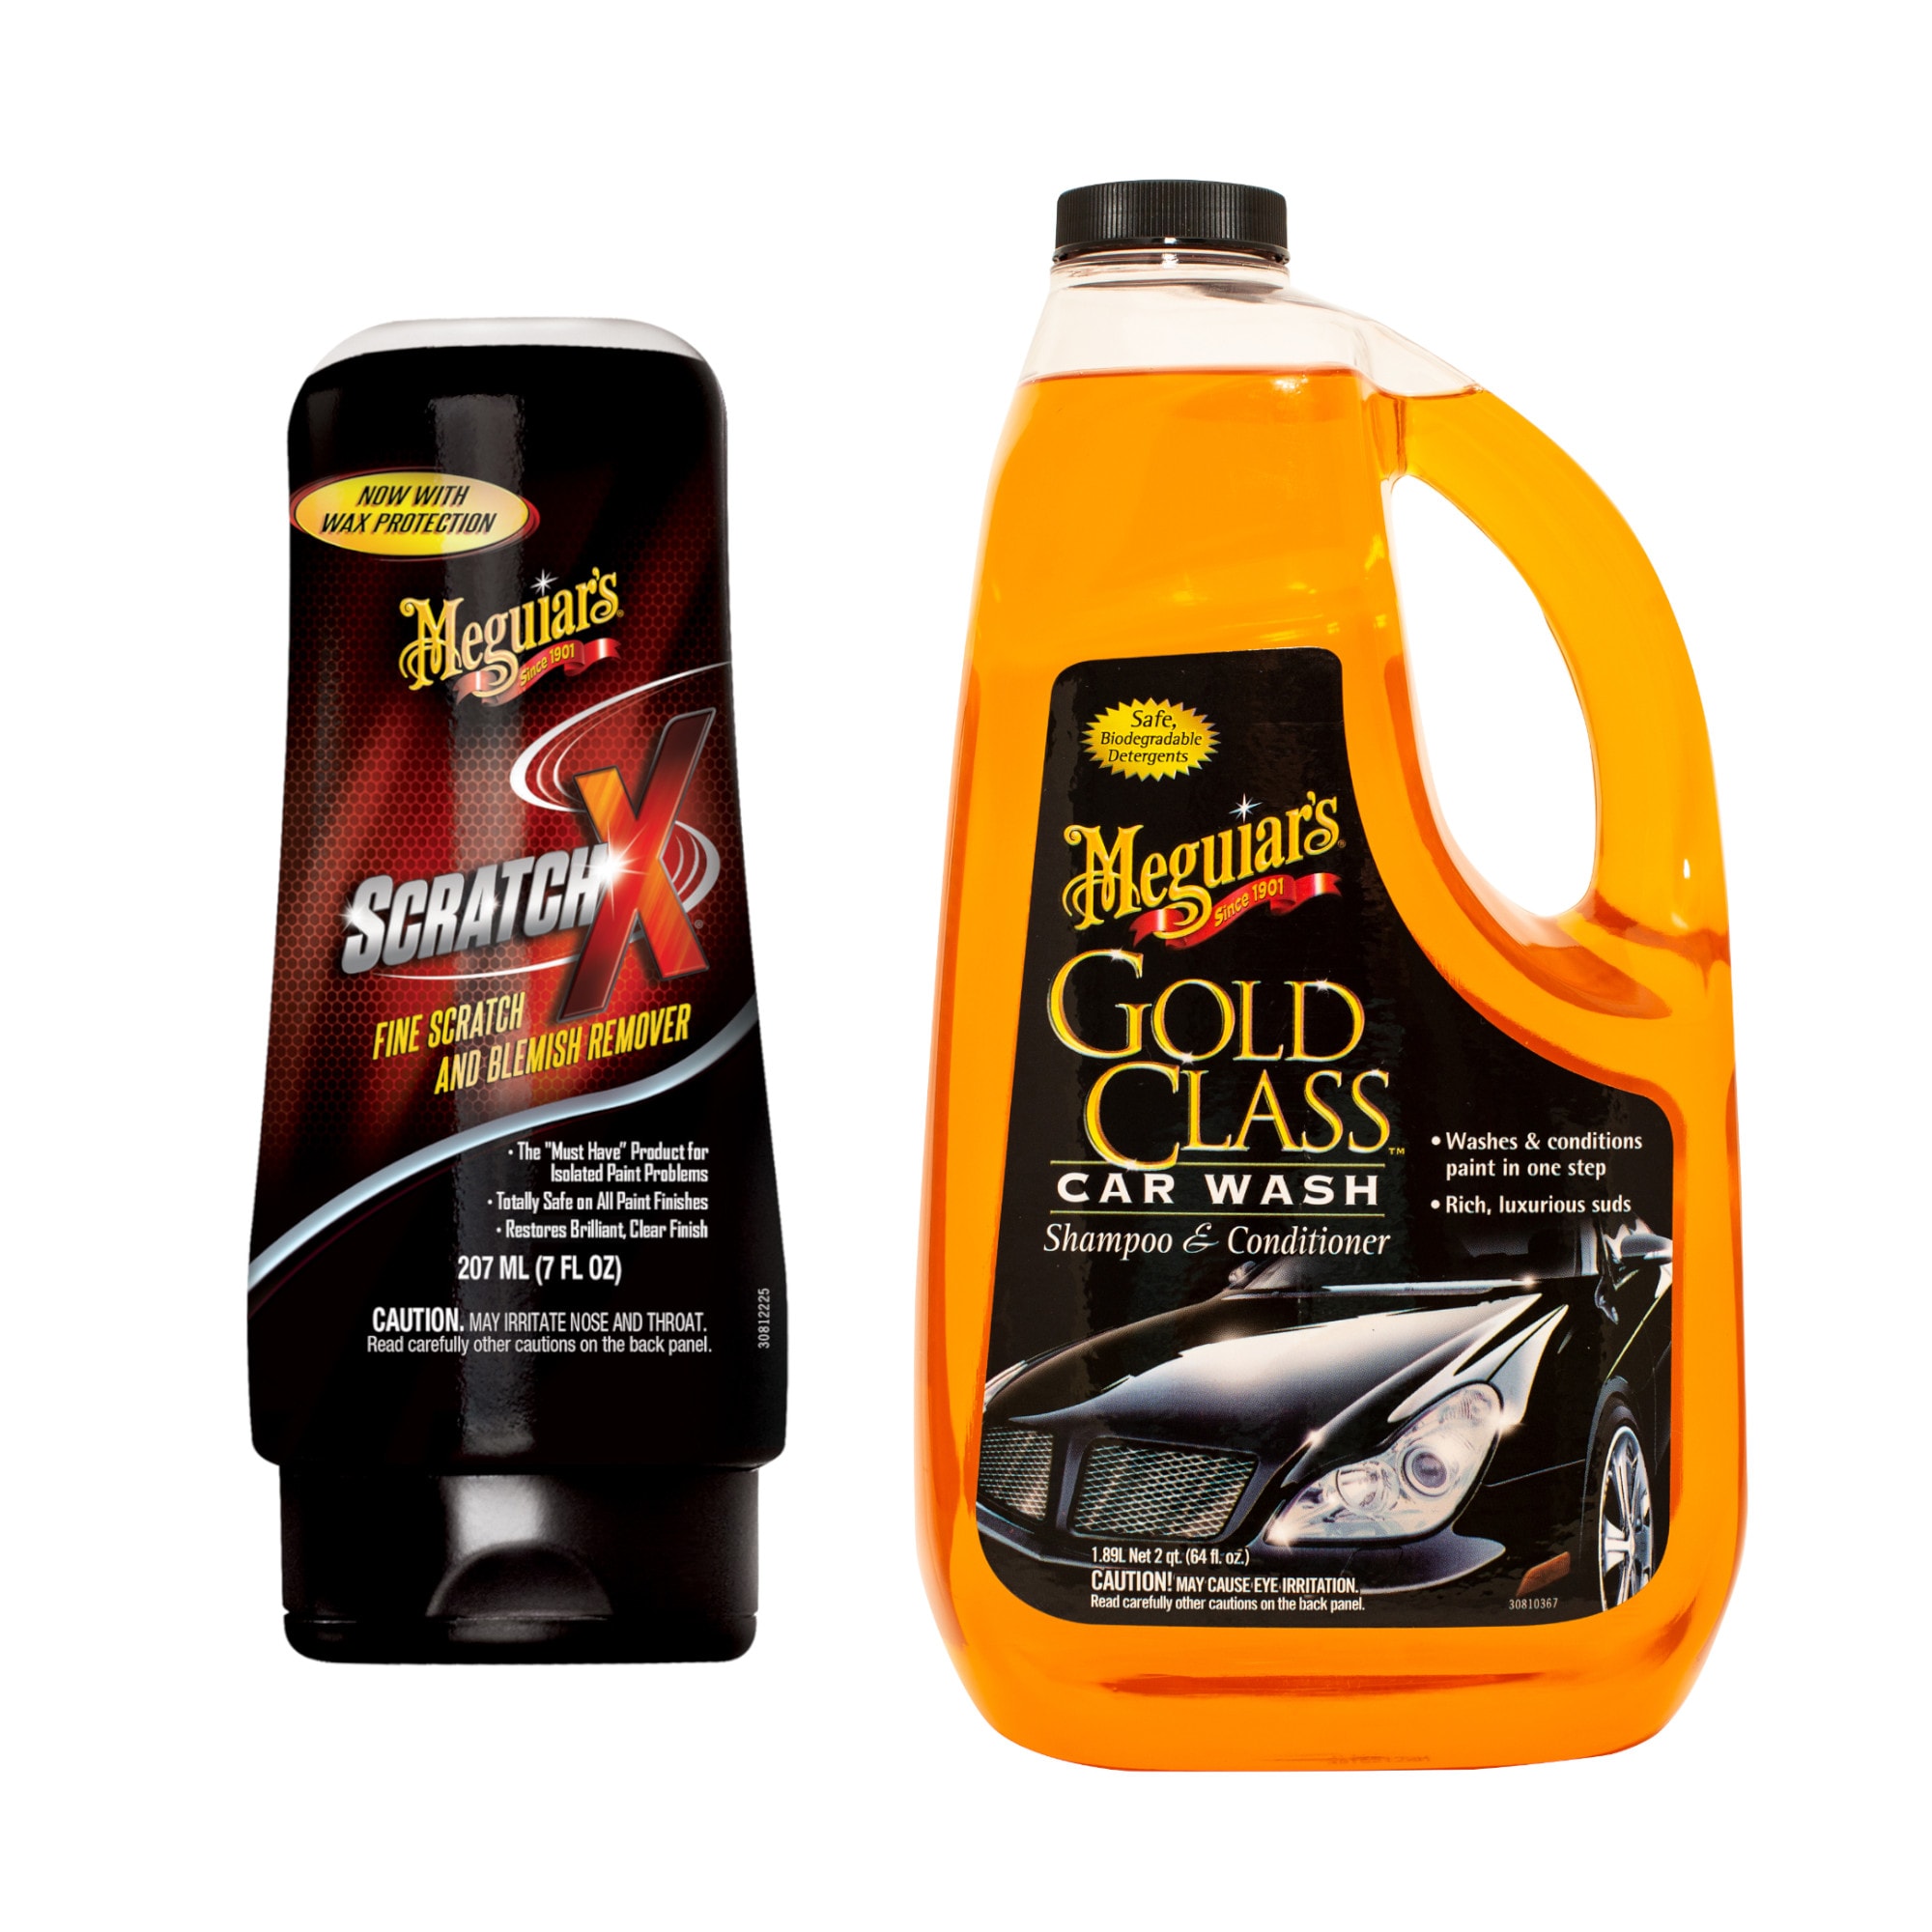 Meguiar's - Make some noise if you've got our Gold Class